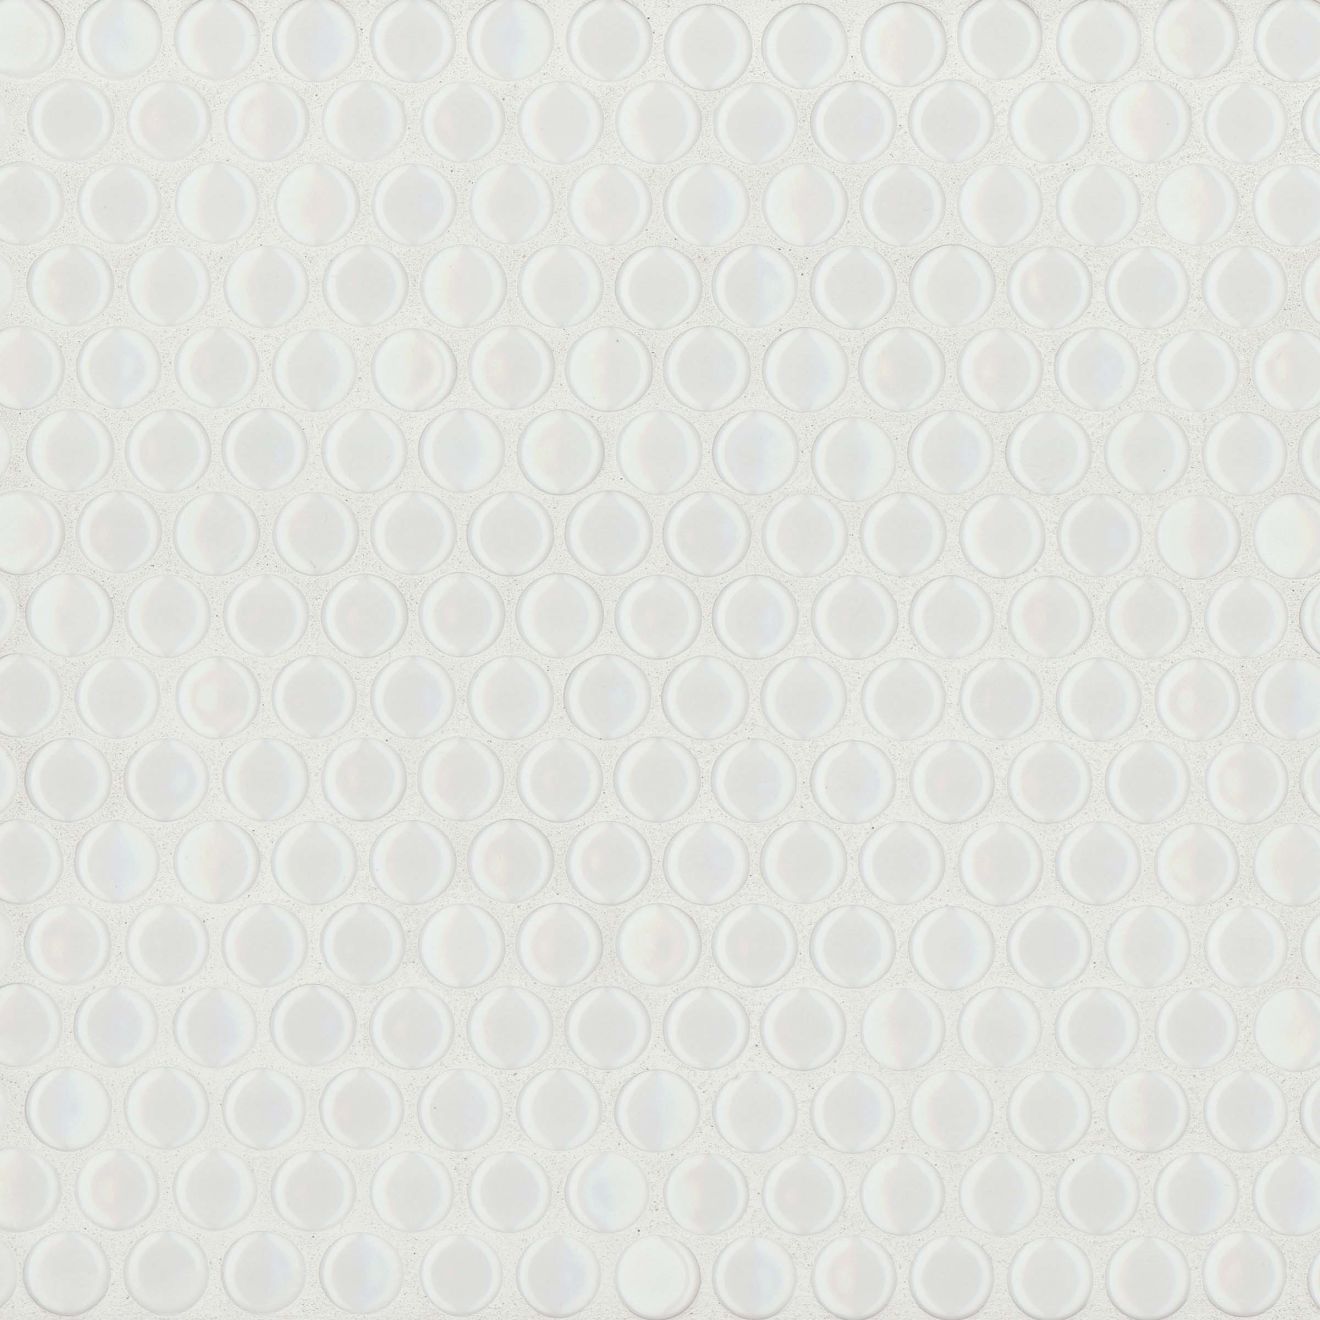 White gloss penny shaped mosaic tile on a beige background.